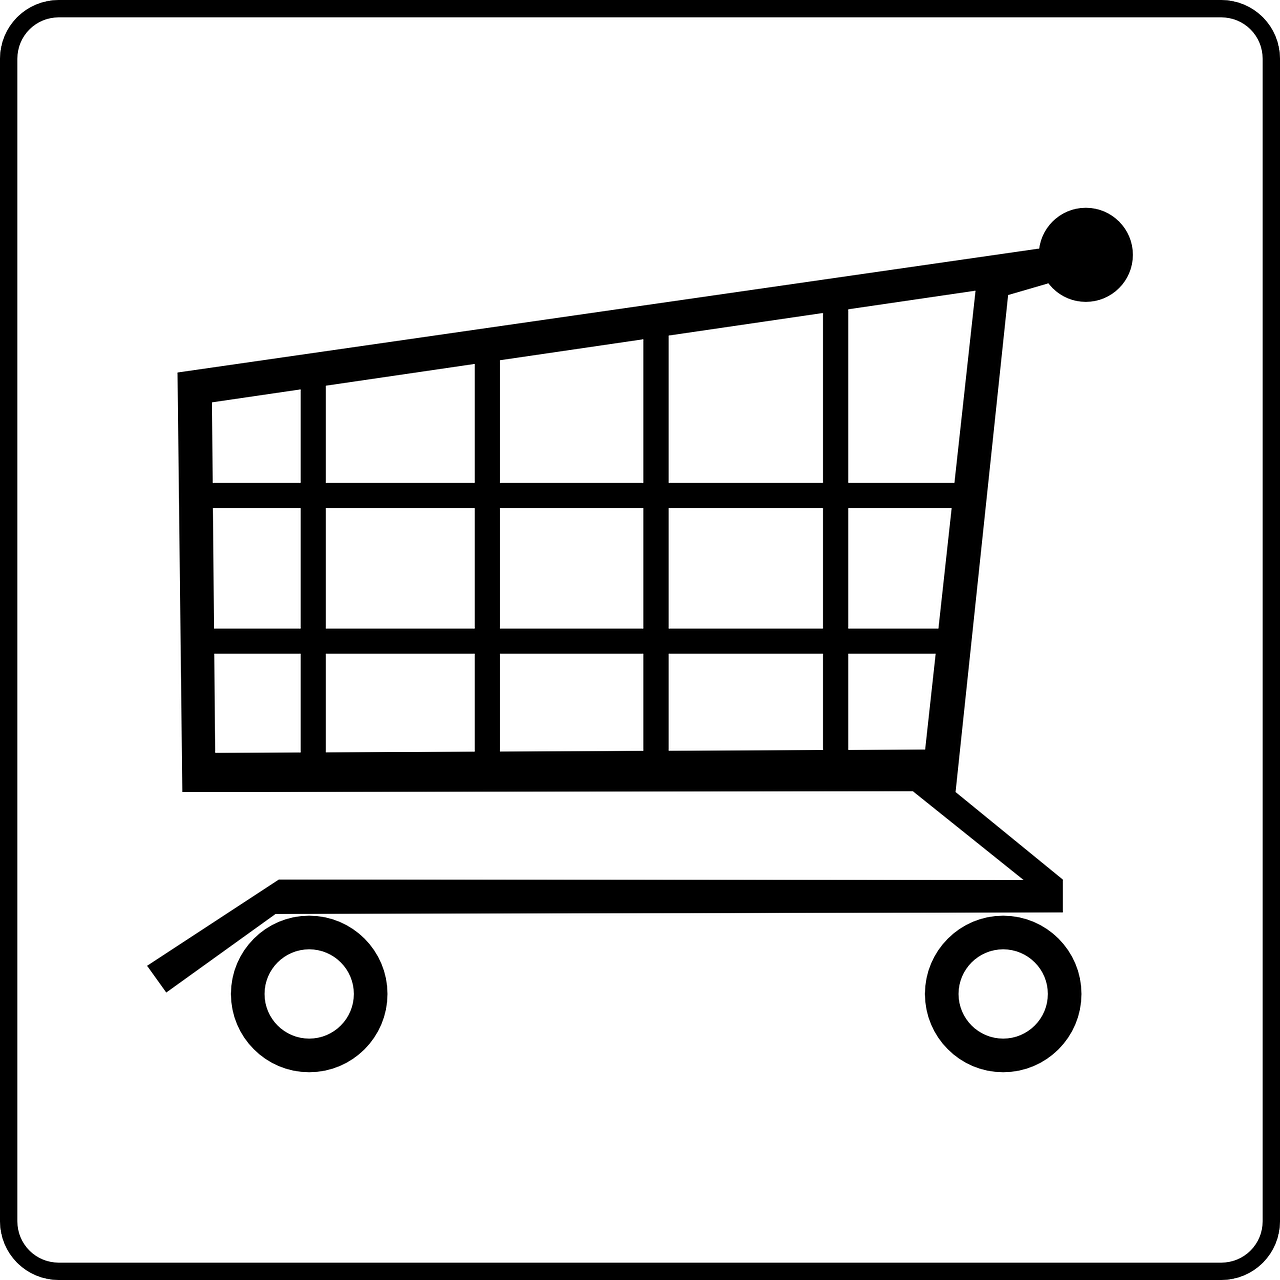 a black and white picture of a shopping cart, by Konrad Krzyżanowski, trending on pixabay, computer art, clipart icon, 2 0 5 6 x 2 0 5 6, product label, 1 0 2 4 x 7 6 8